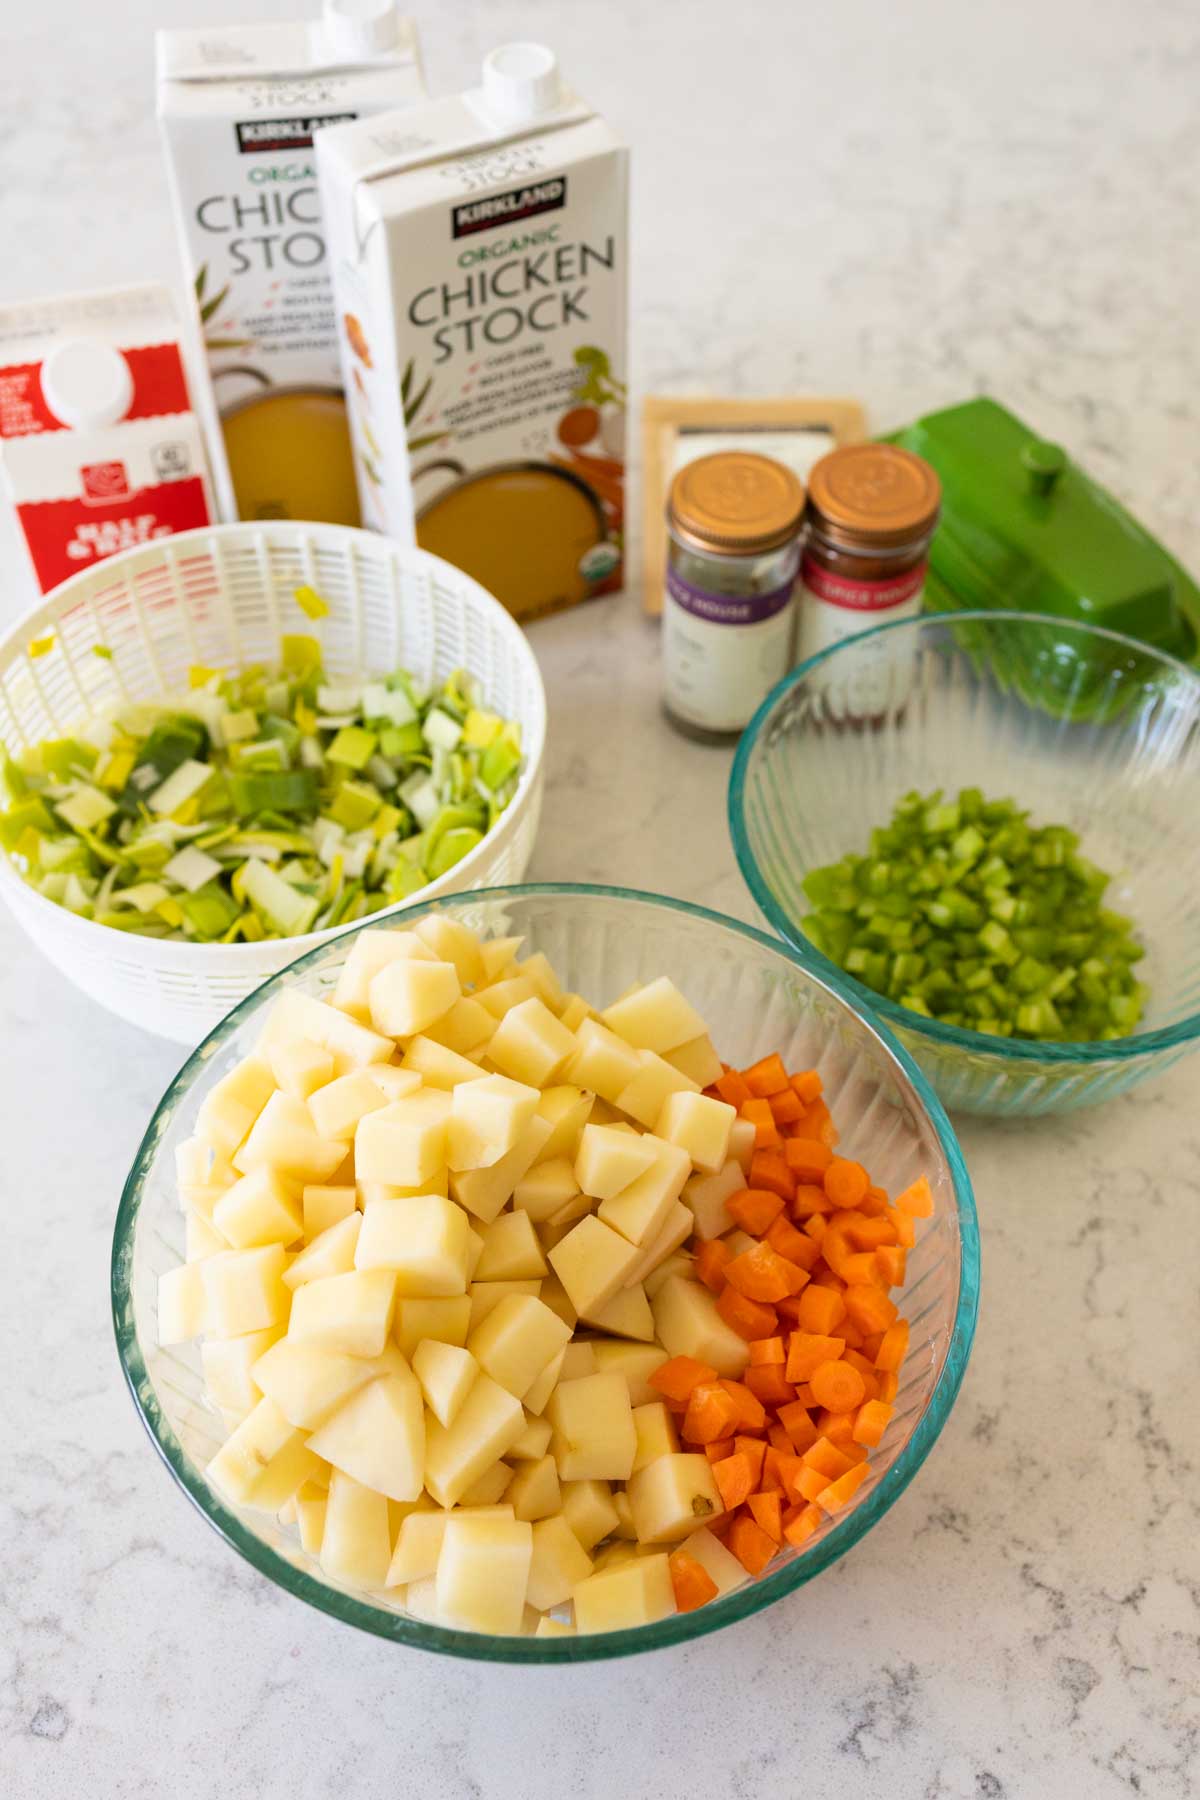 Bowls filled with chopped potatoes, carrots, leeks, and celery are sitting on the counter to show the scale.